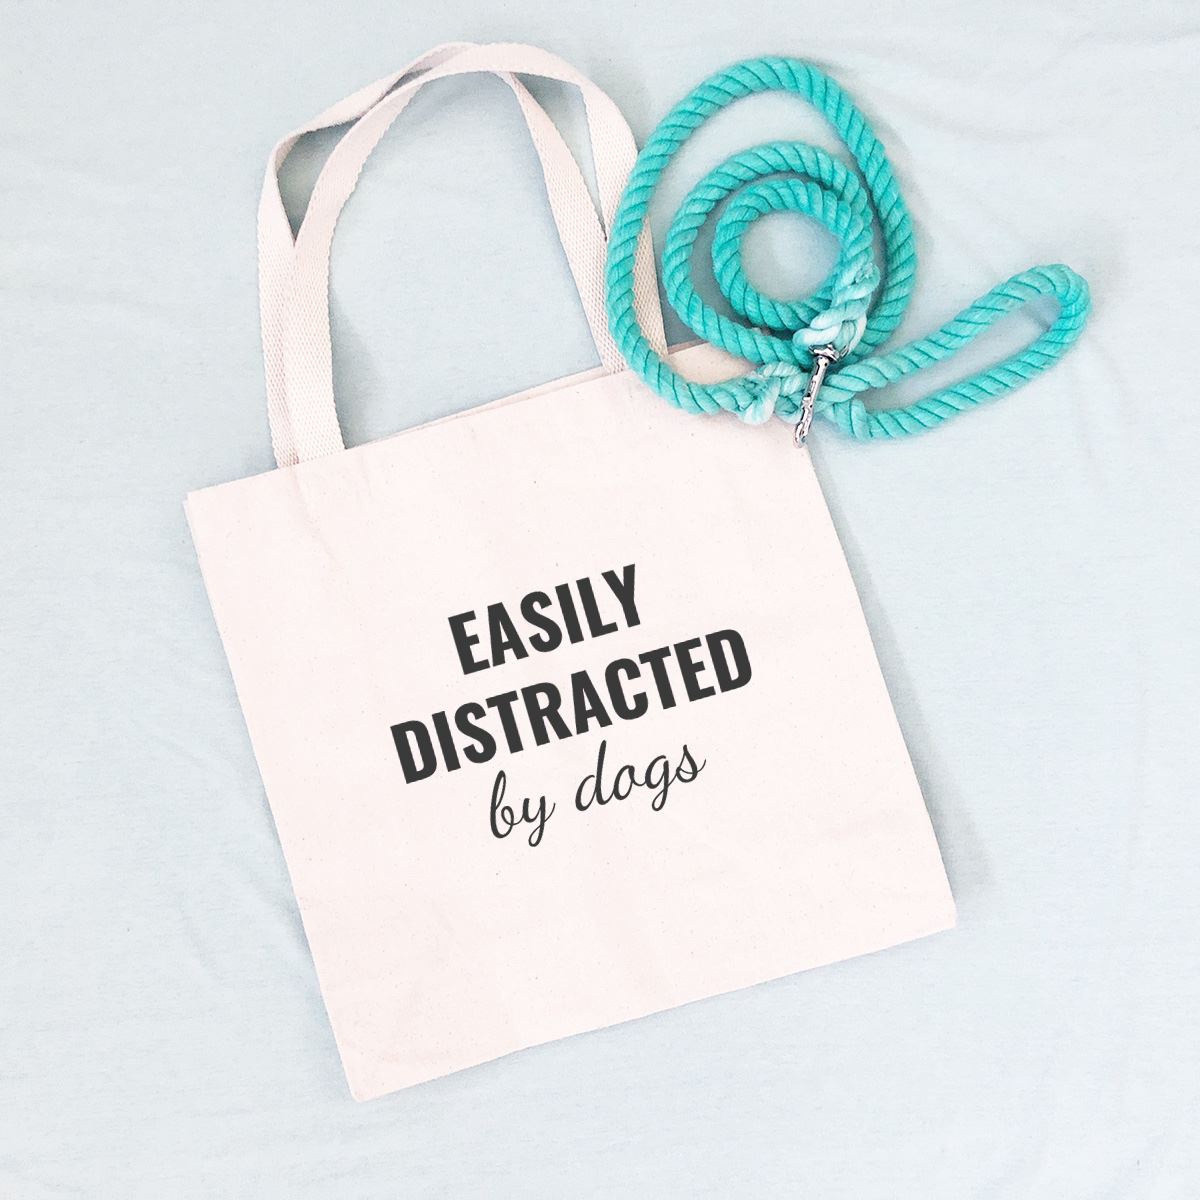 dog mom tote bag that says "EASILY DISTRACTED by dogs"